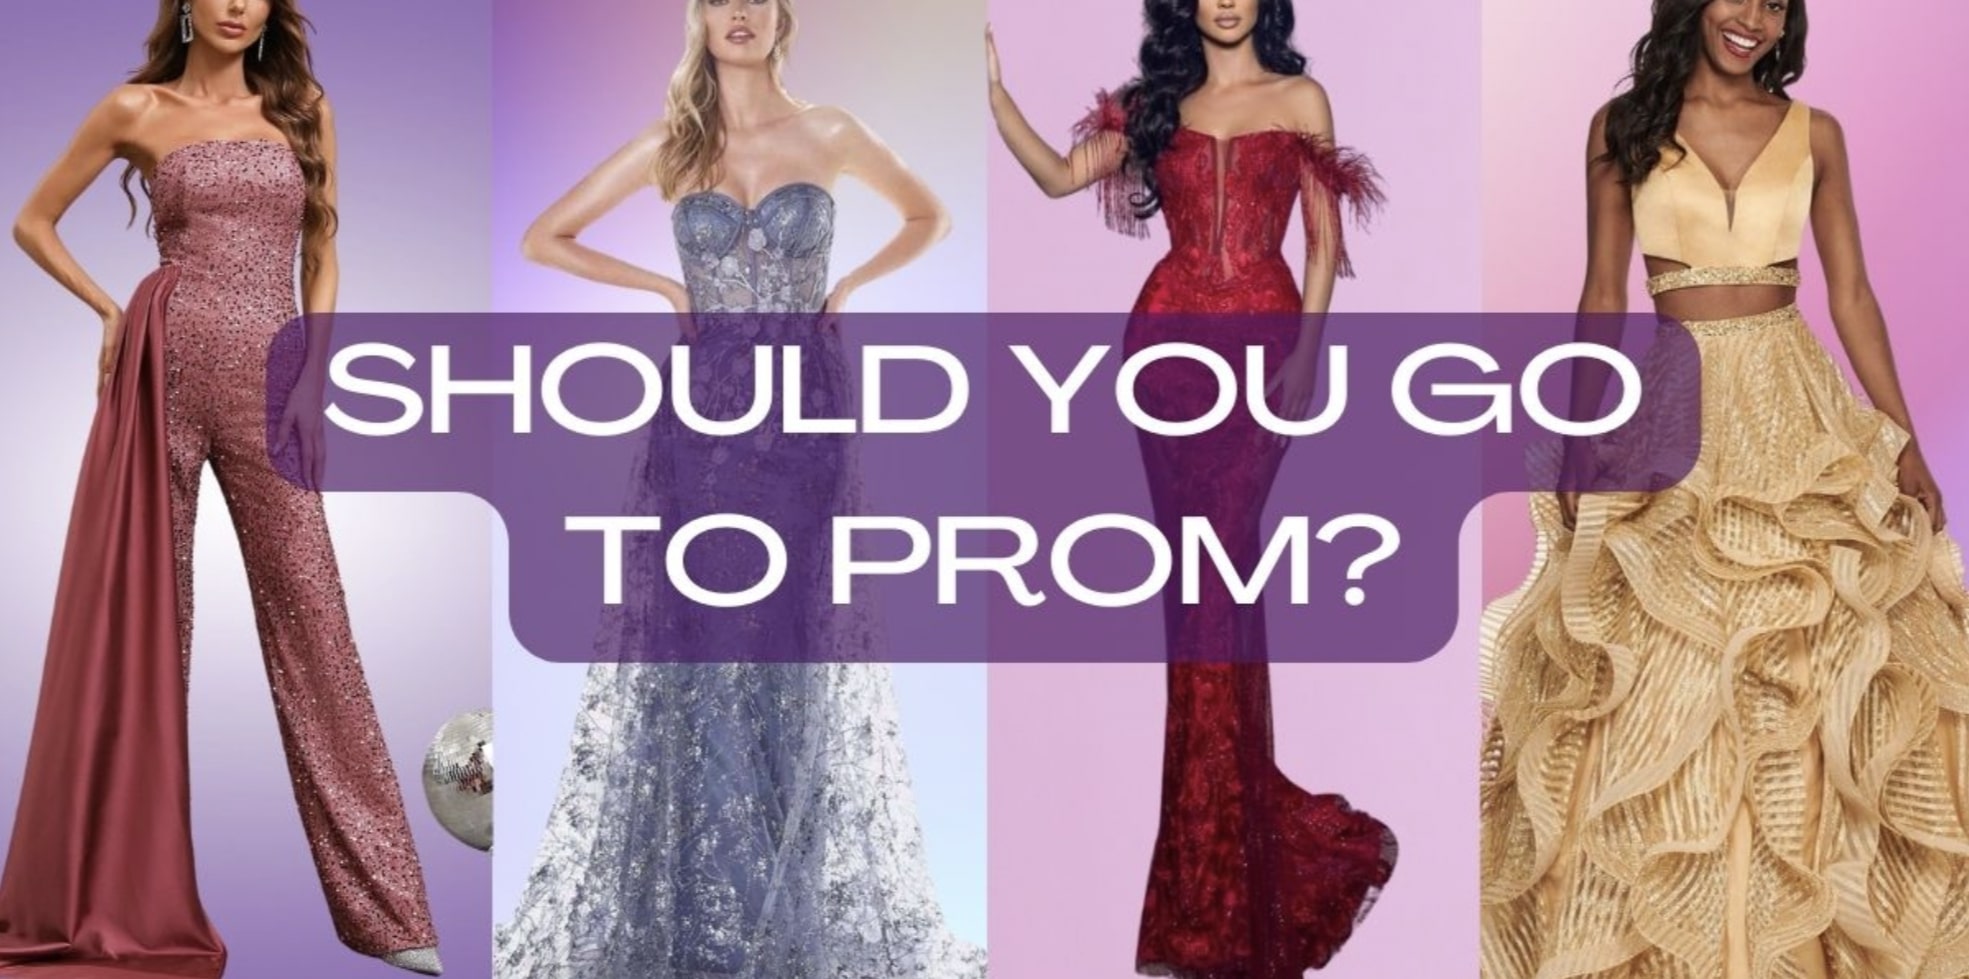 Should I go to Prom?